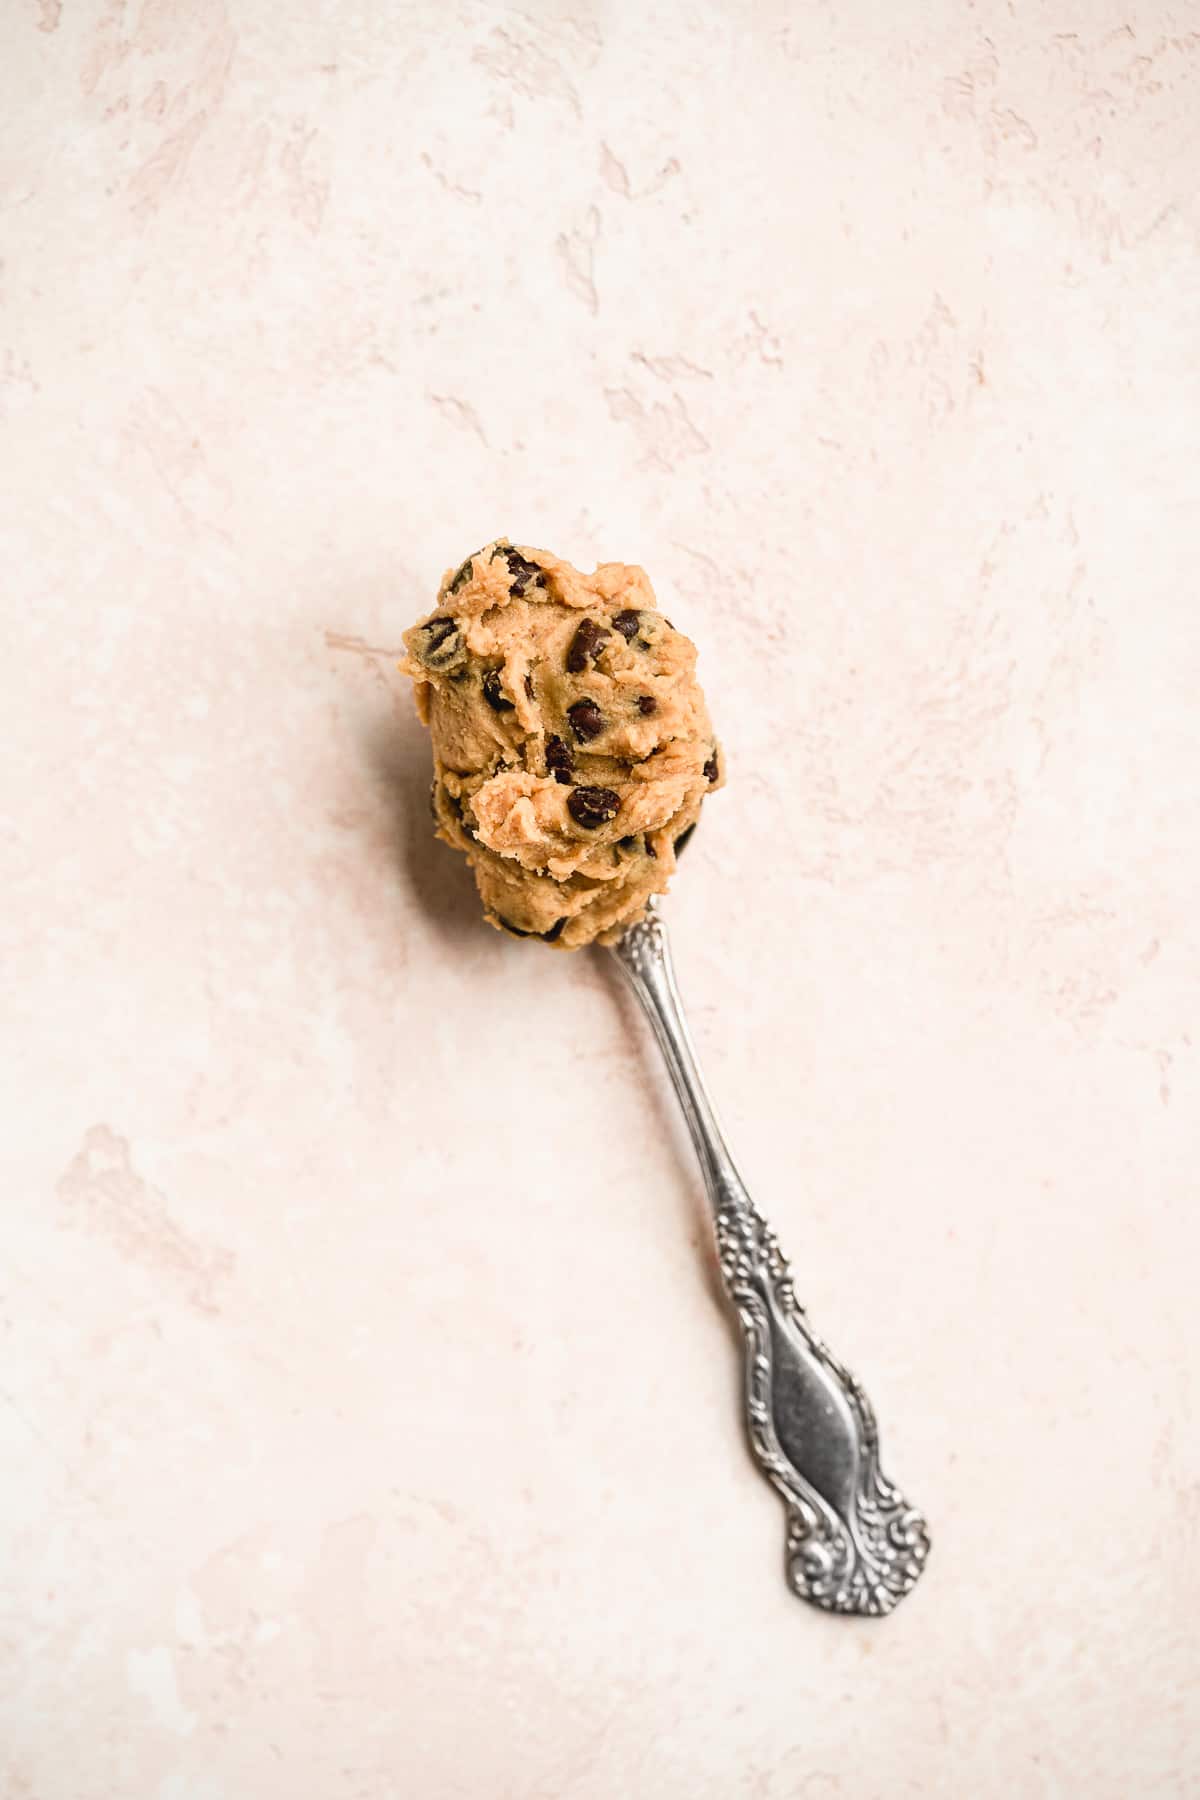 A silver spoon filled with a giant dollop of delicious edible chocolate chip cookie dough.  